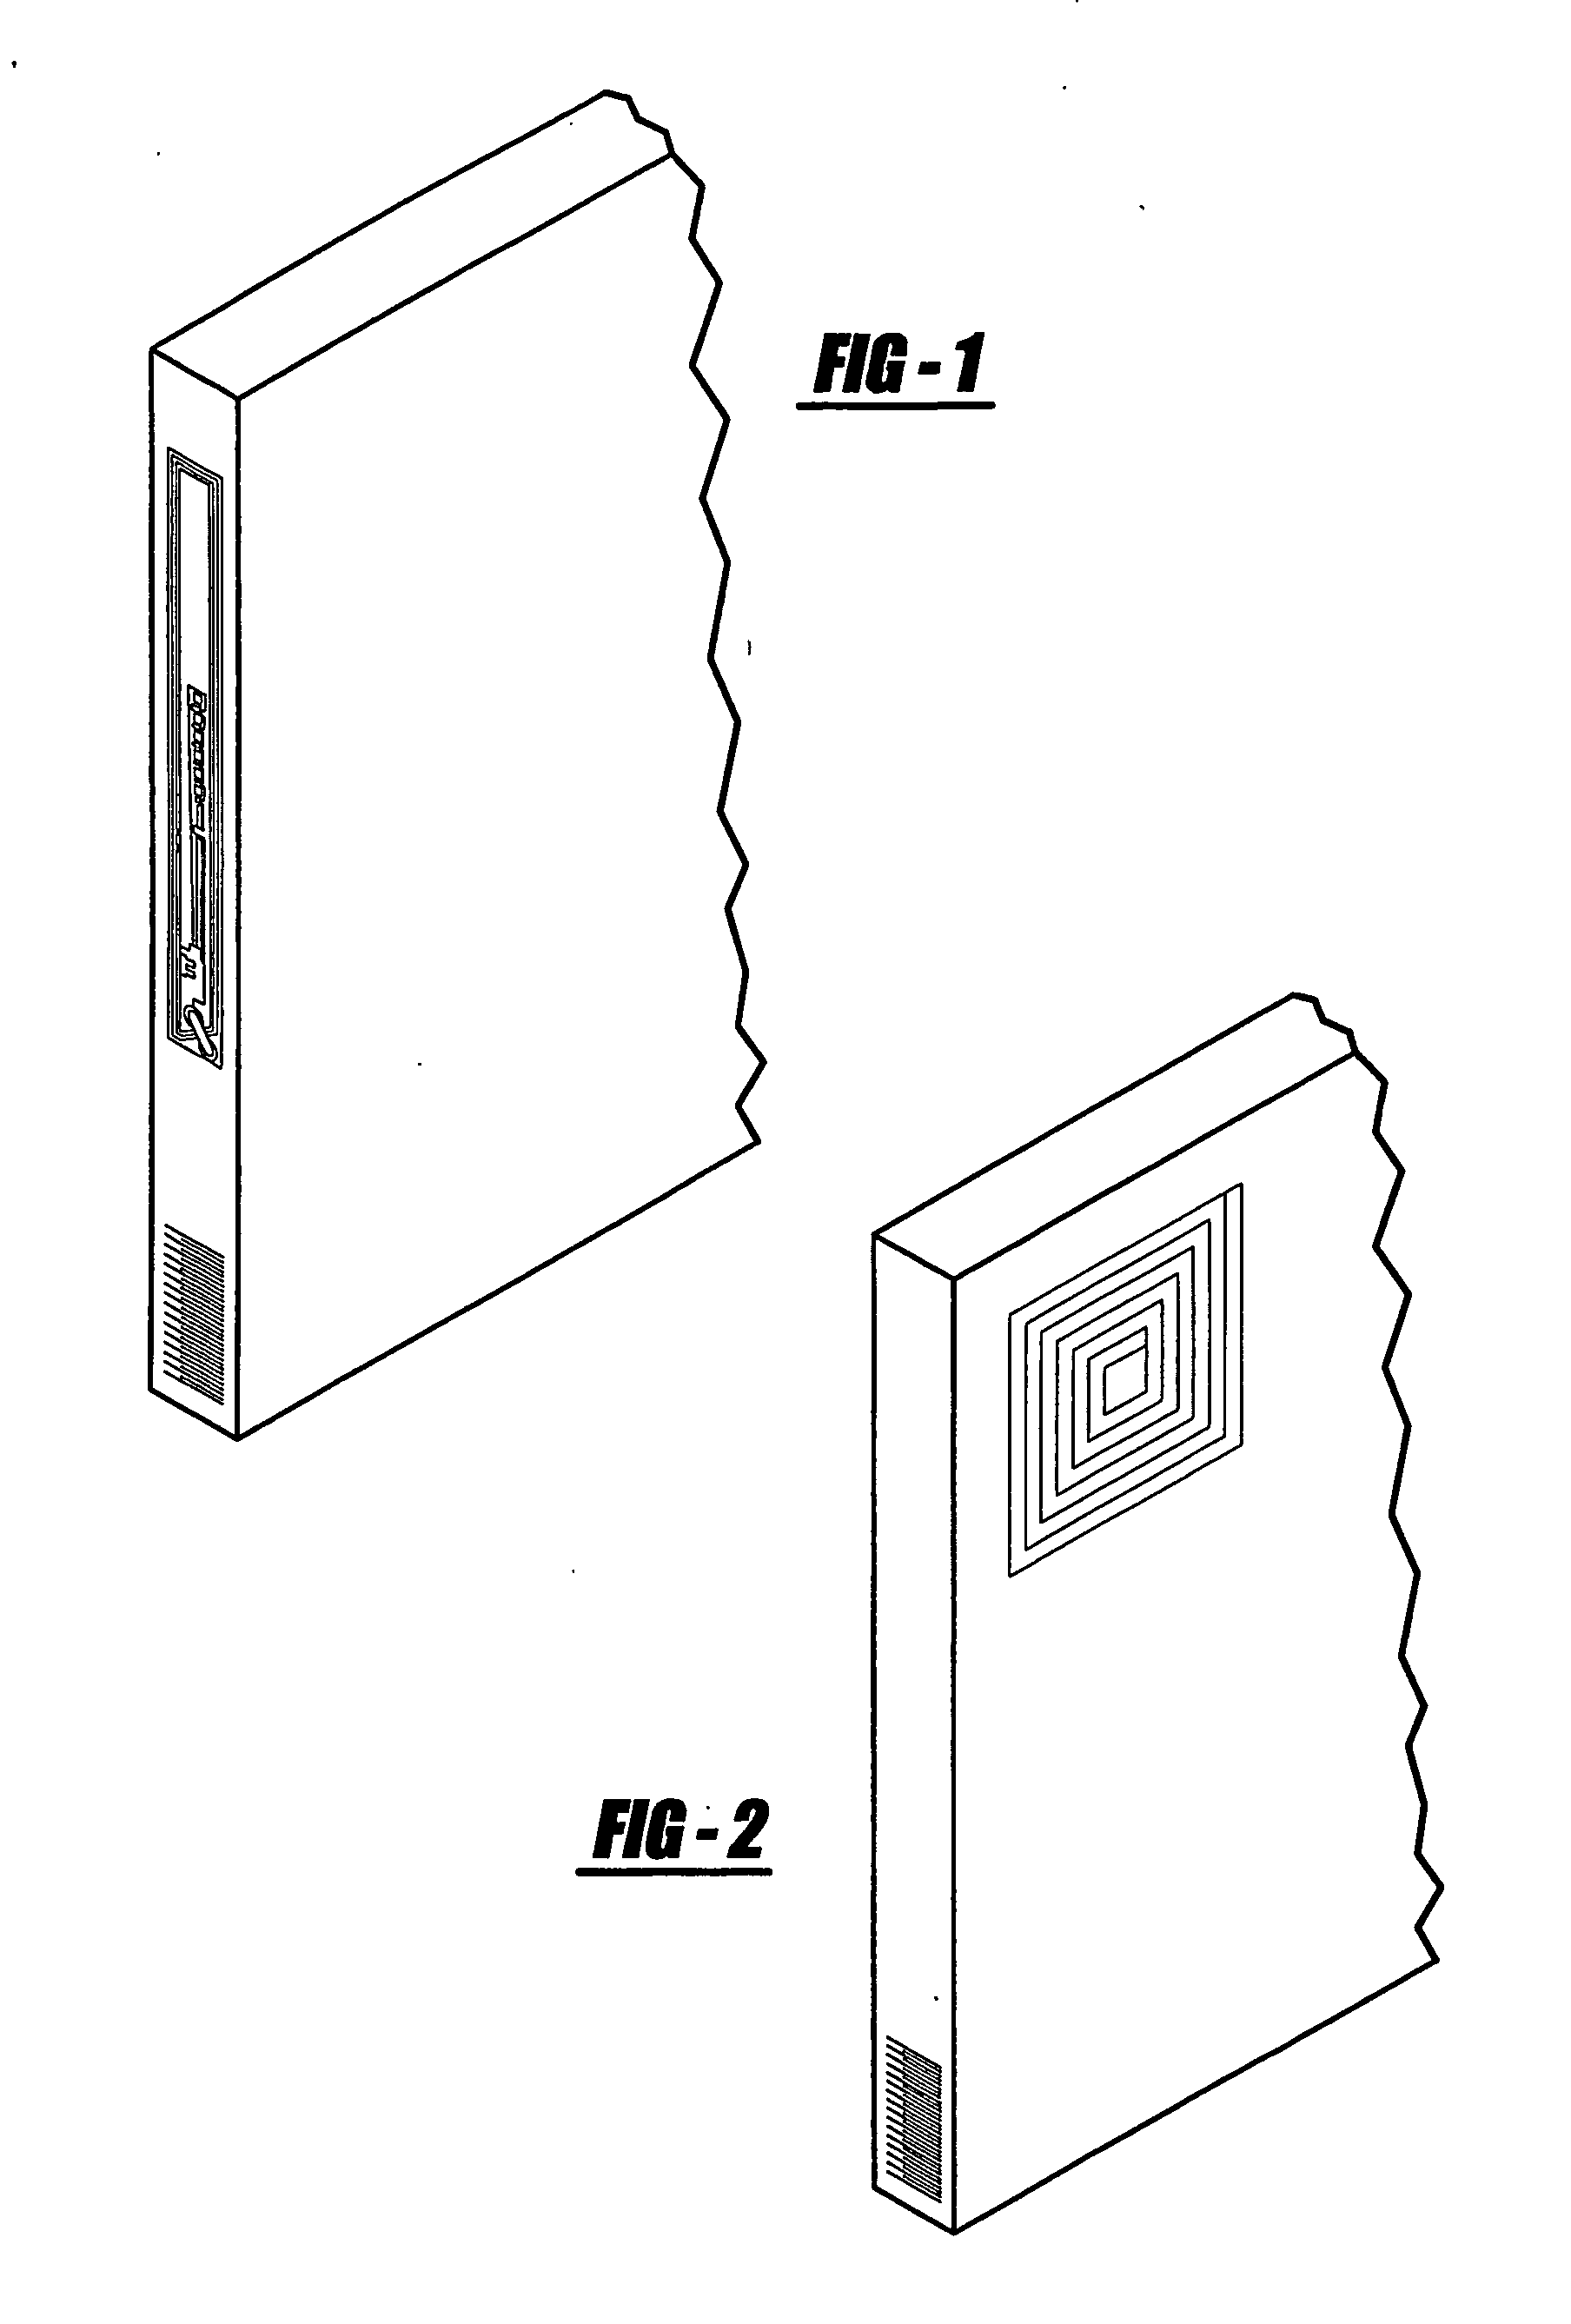 Medical Device Radio Frequency Identification System and Method